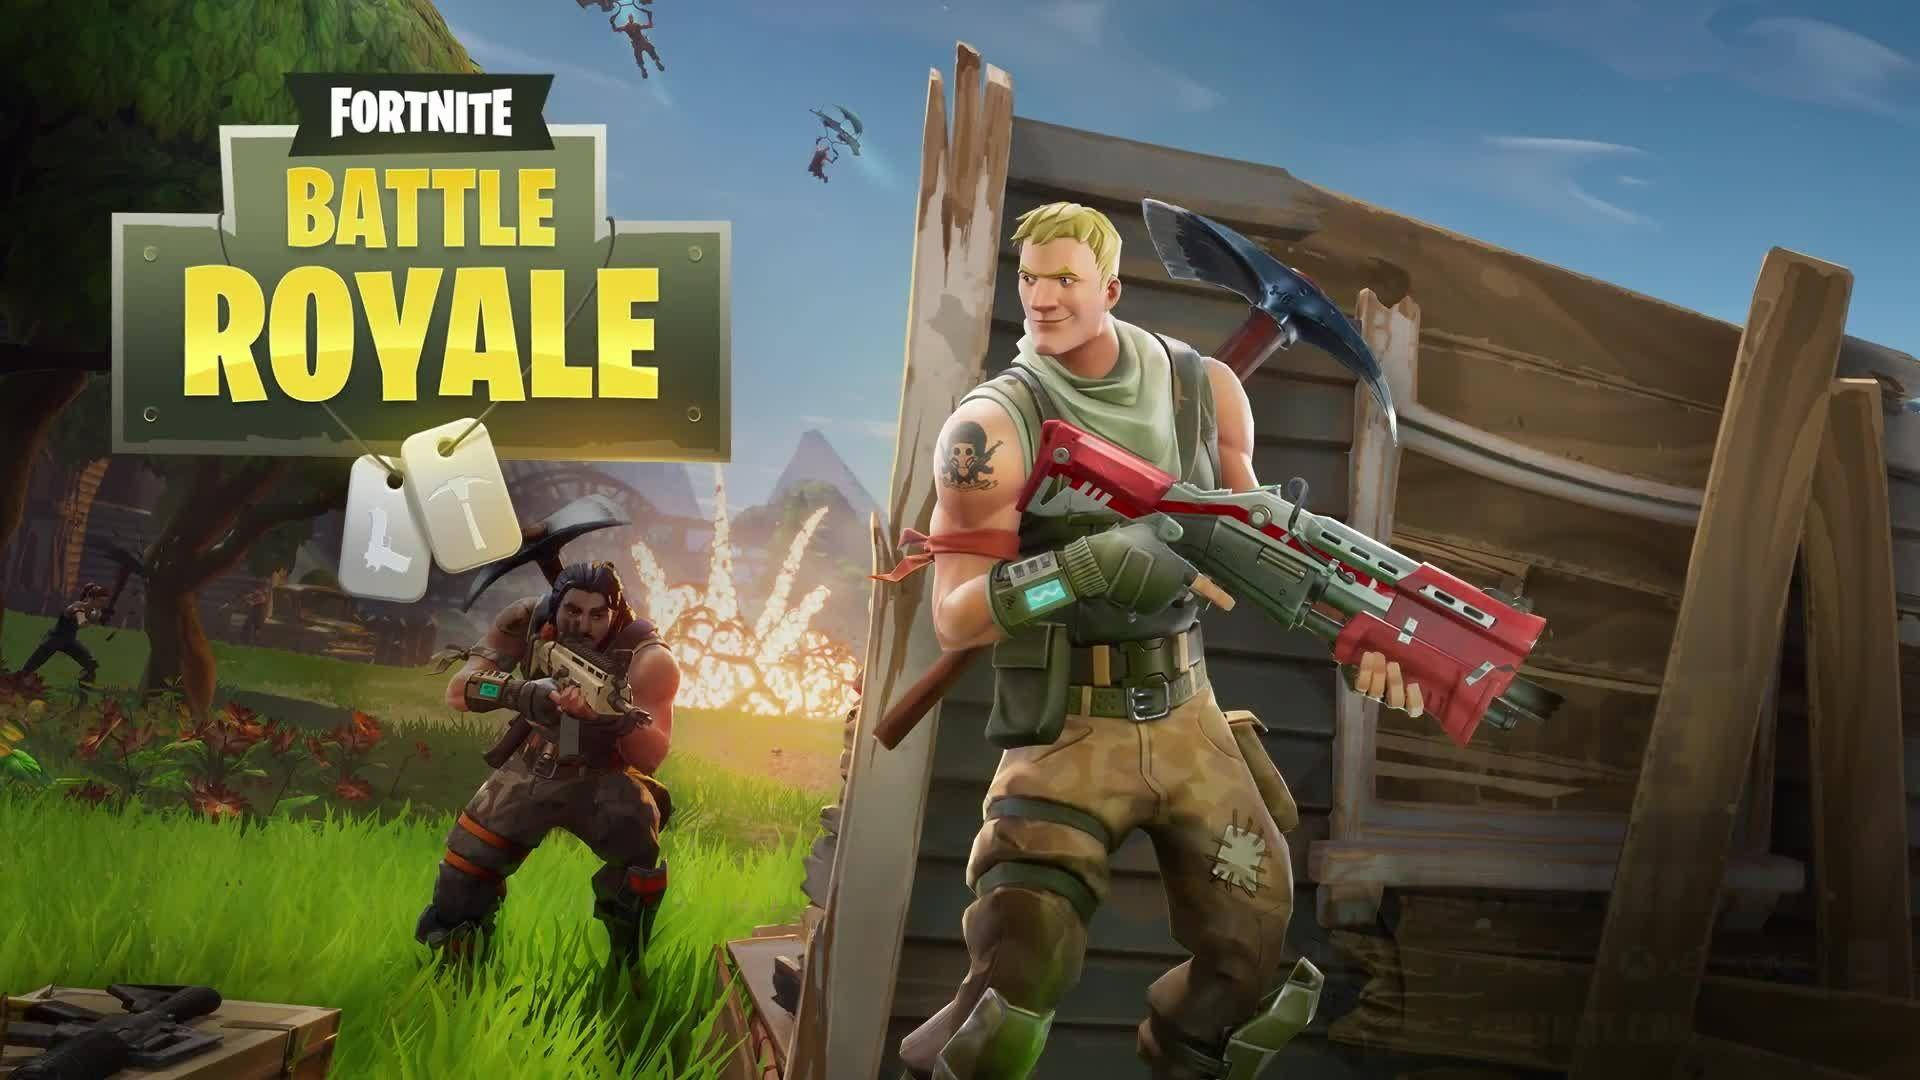 Step into the world of Fortnite and join millions of players fighting for victory in Battle Royale. Wallpaper